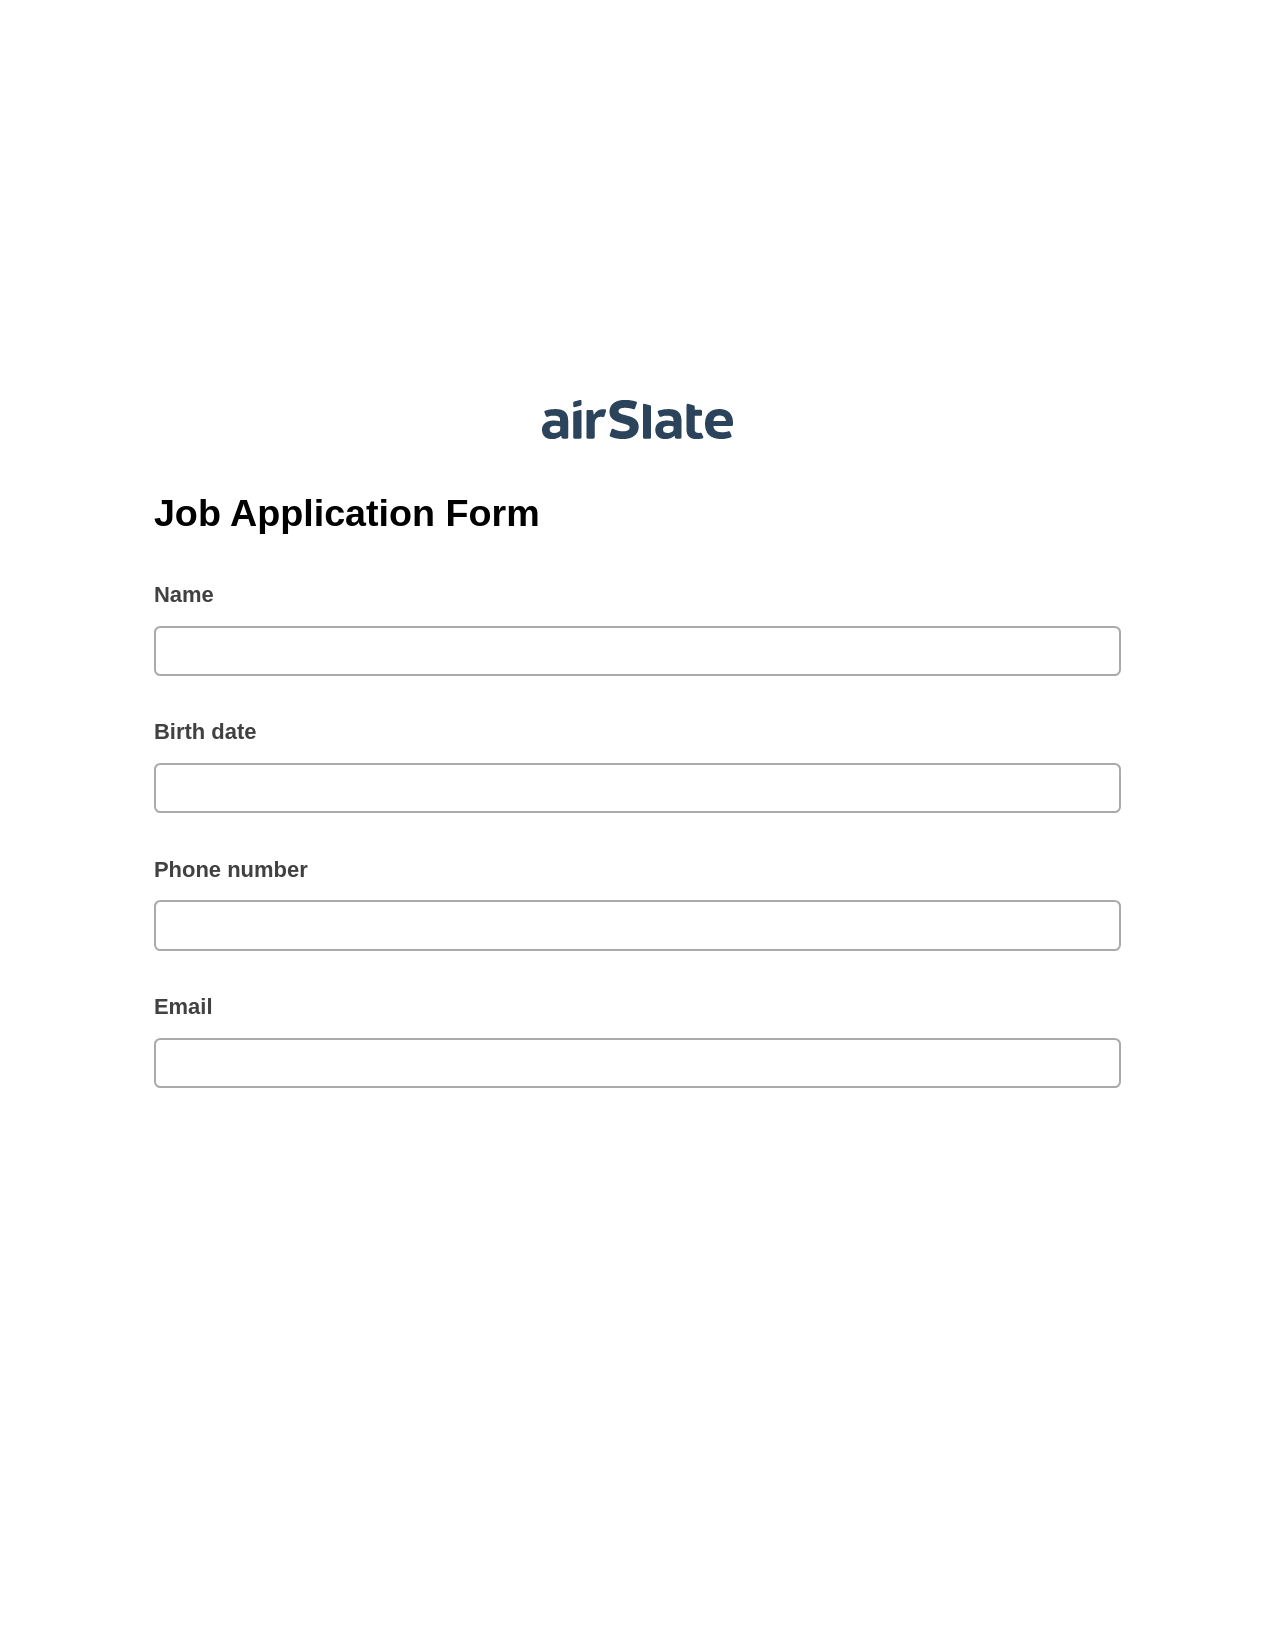 Job Application Form Pre-fill from Office 365 Excel Bot, System Bot - Create a Slate in another Flow, Google Drive Bot